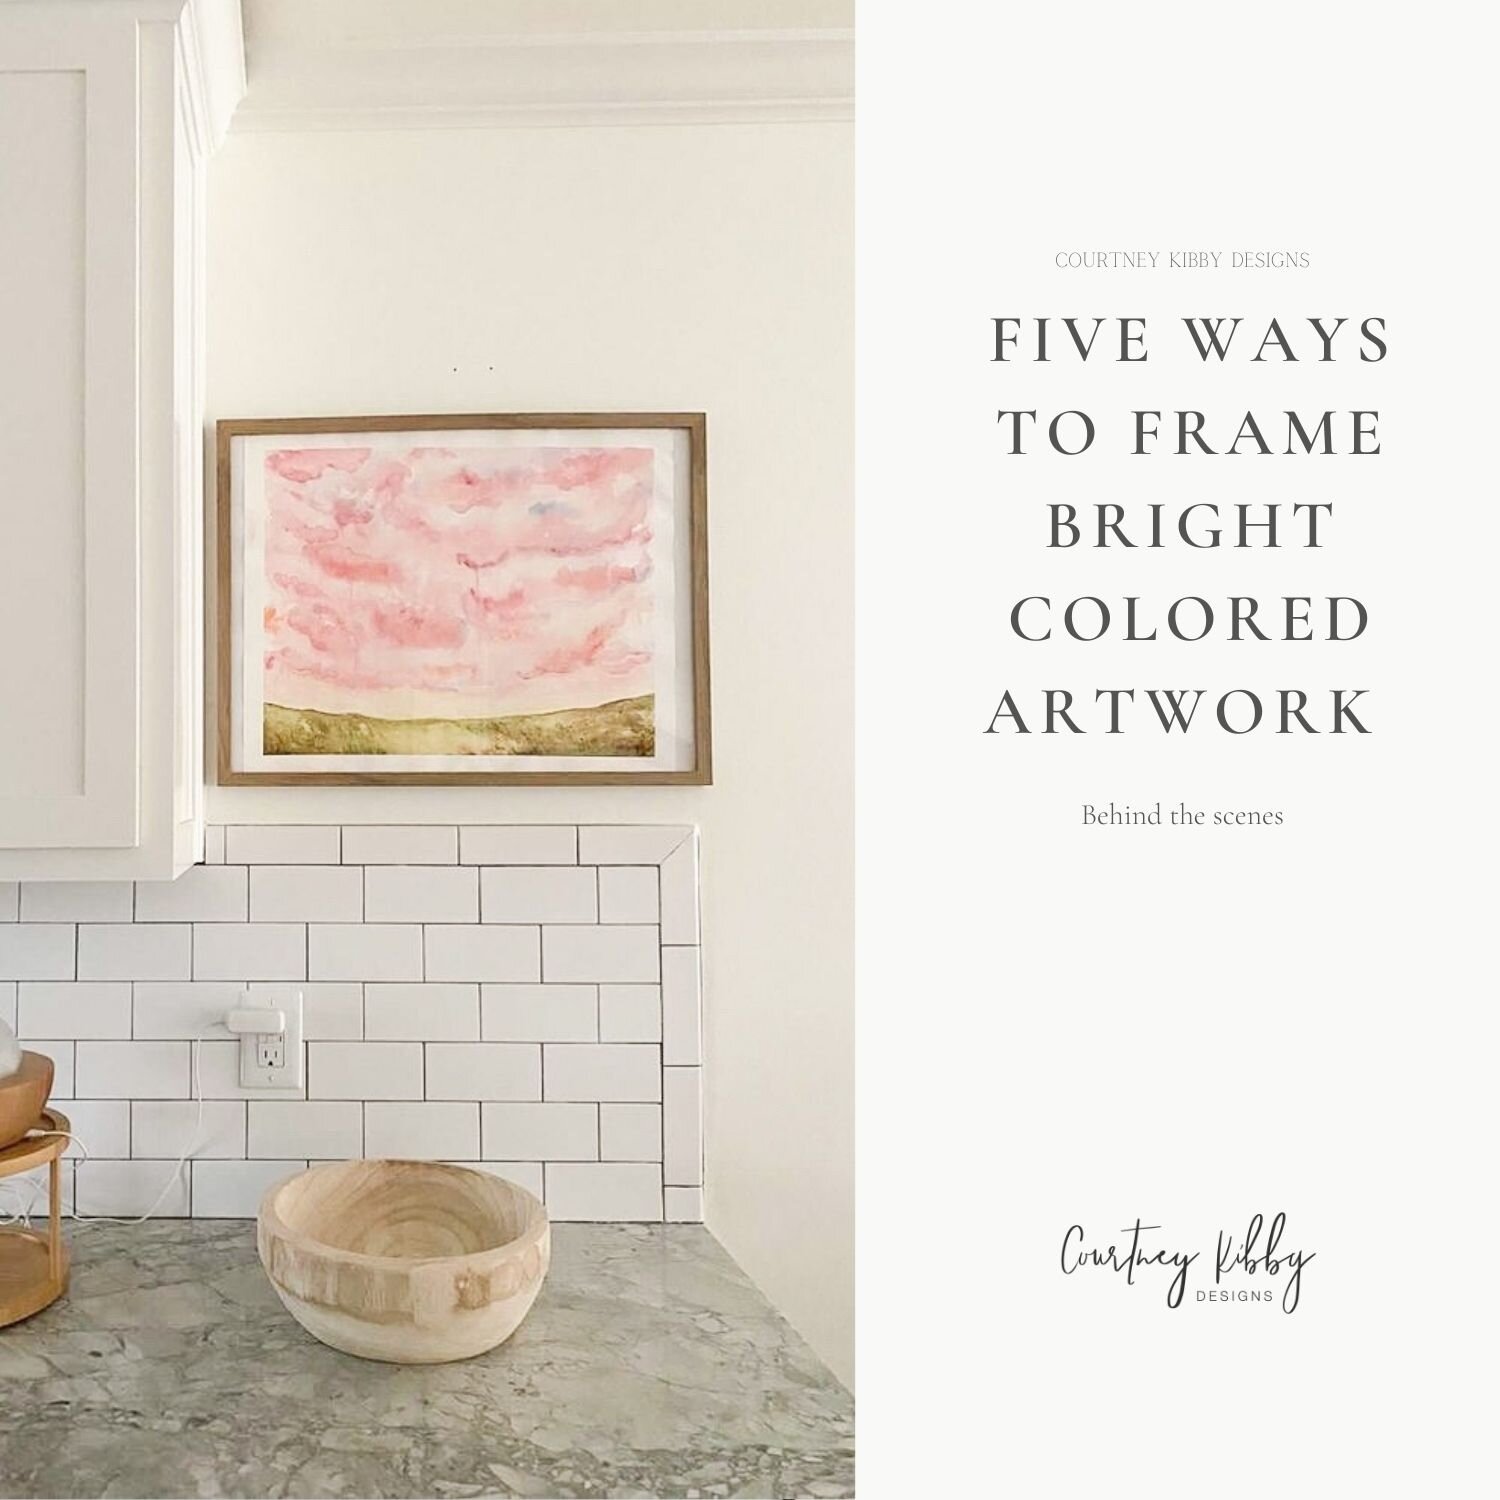 five ways to frame artwork beautifully by live wedding painter and artist courtney kibby designs in tulsa, oklahoma